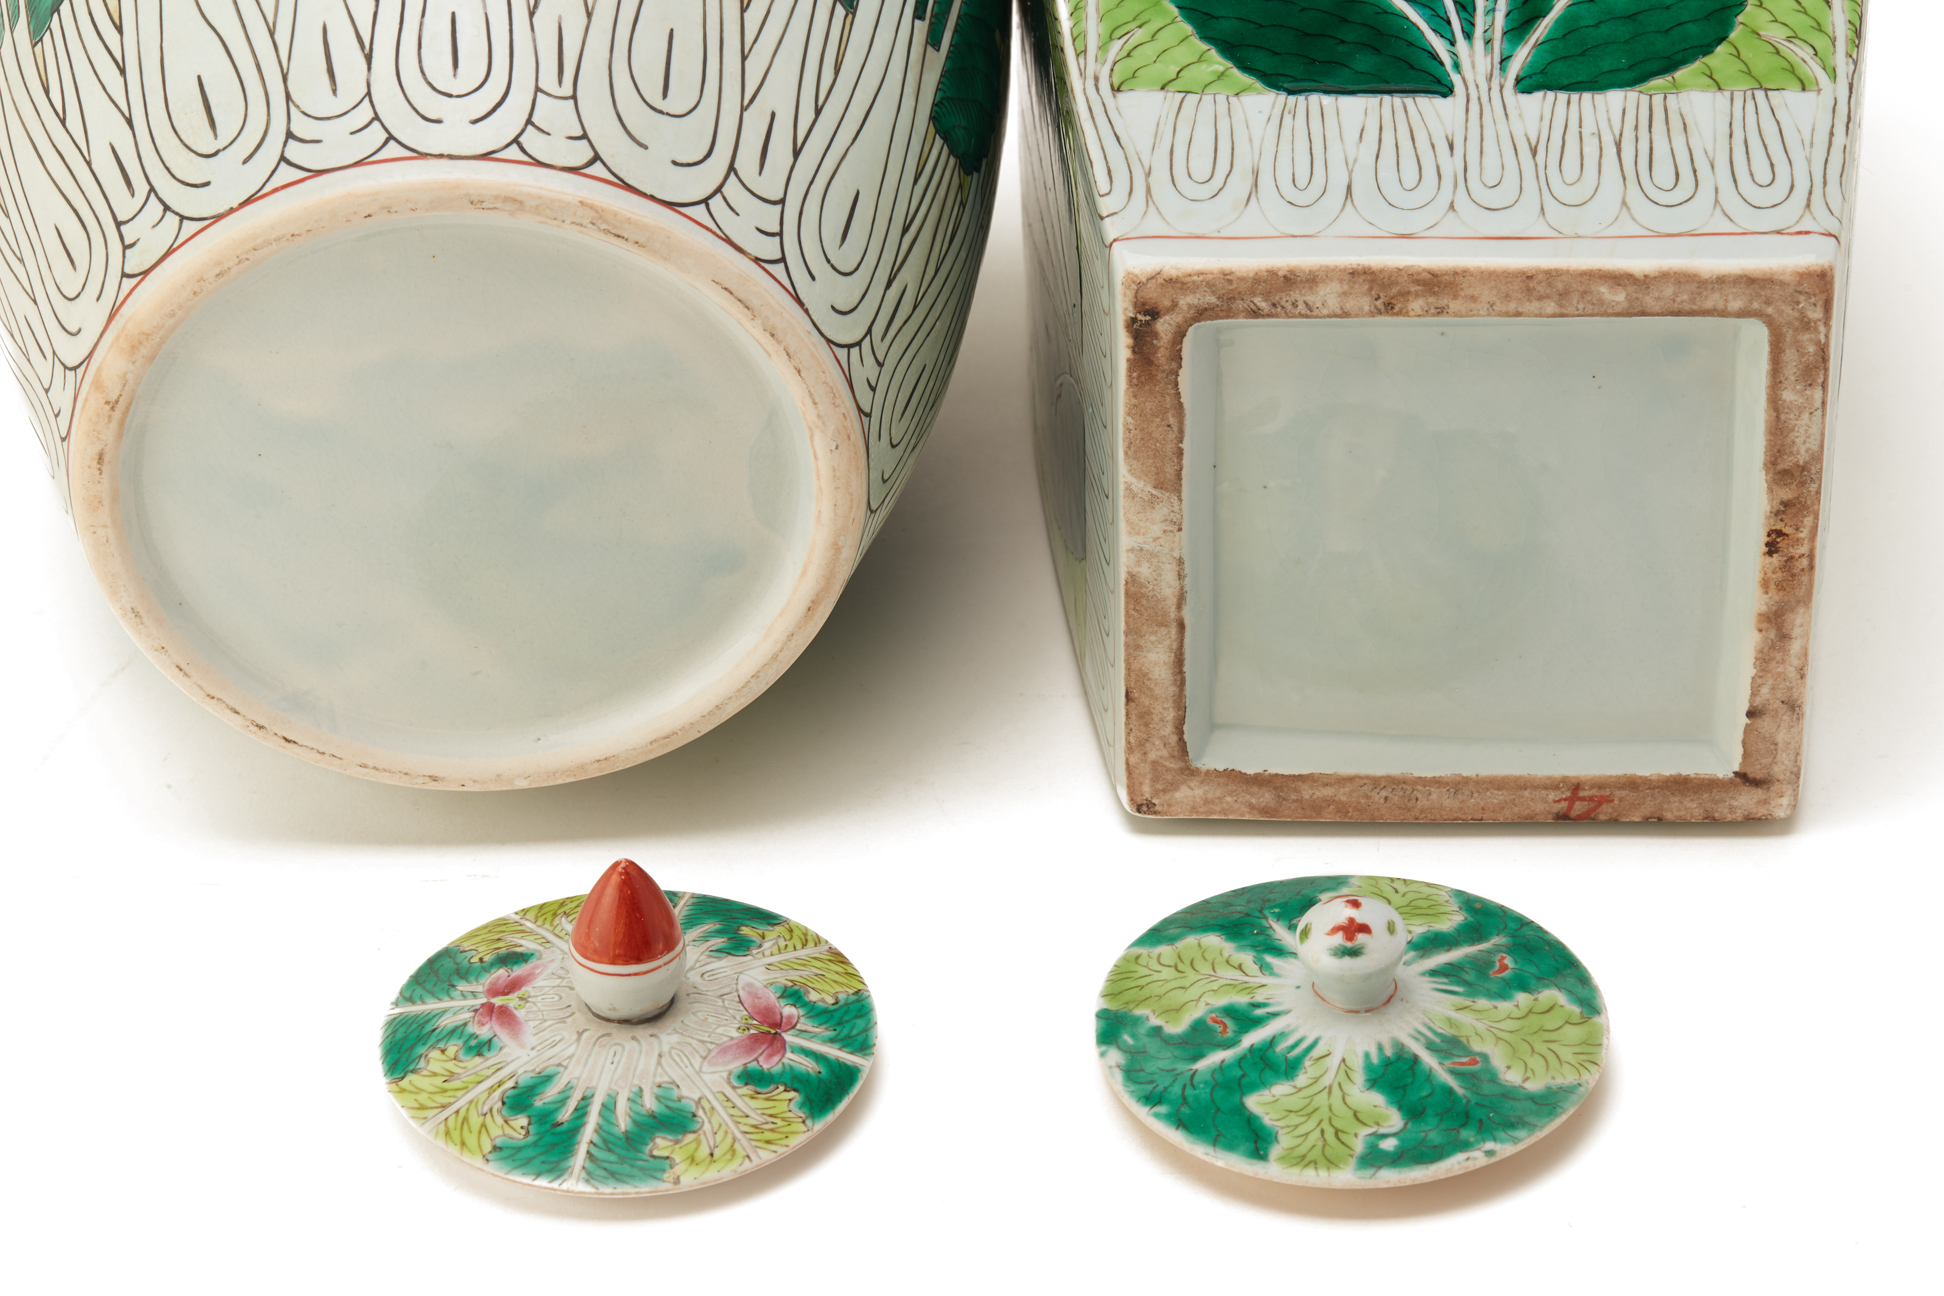 TWO CHINESE PORCELAIN JARS AND COVERS - Image 2 of 2